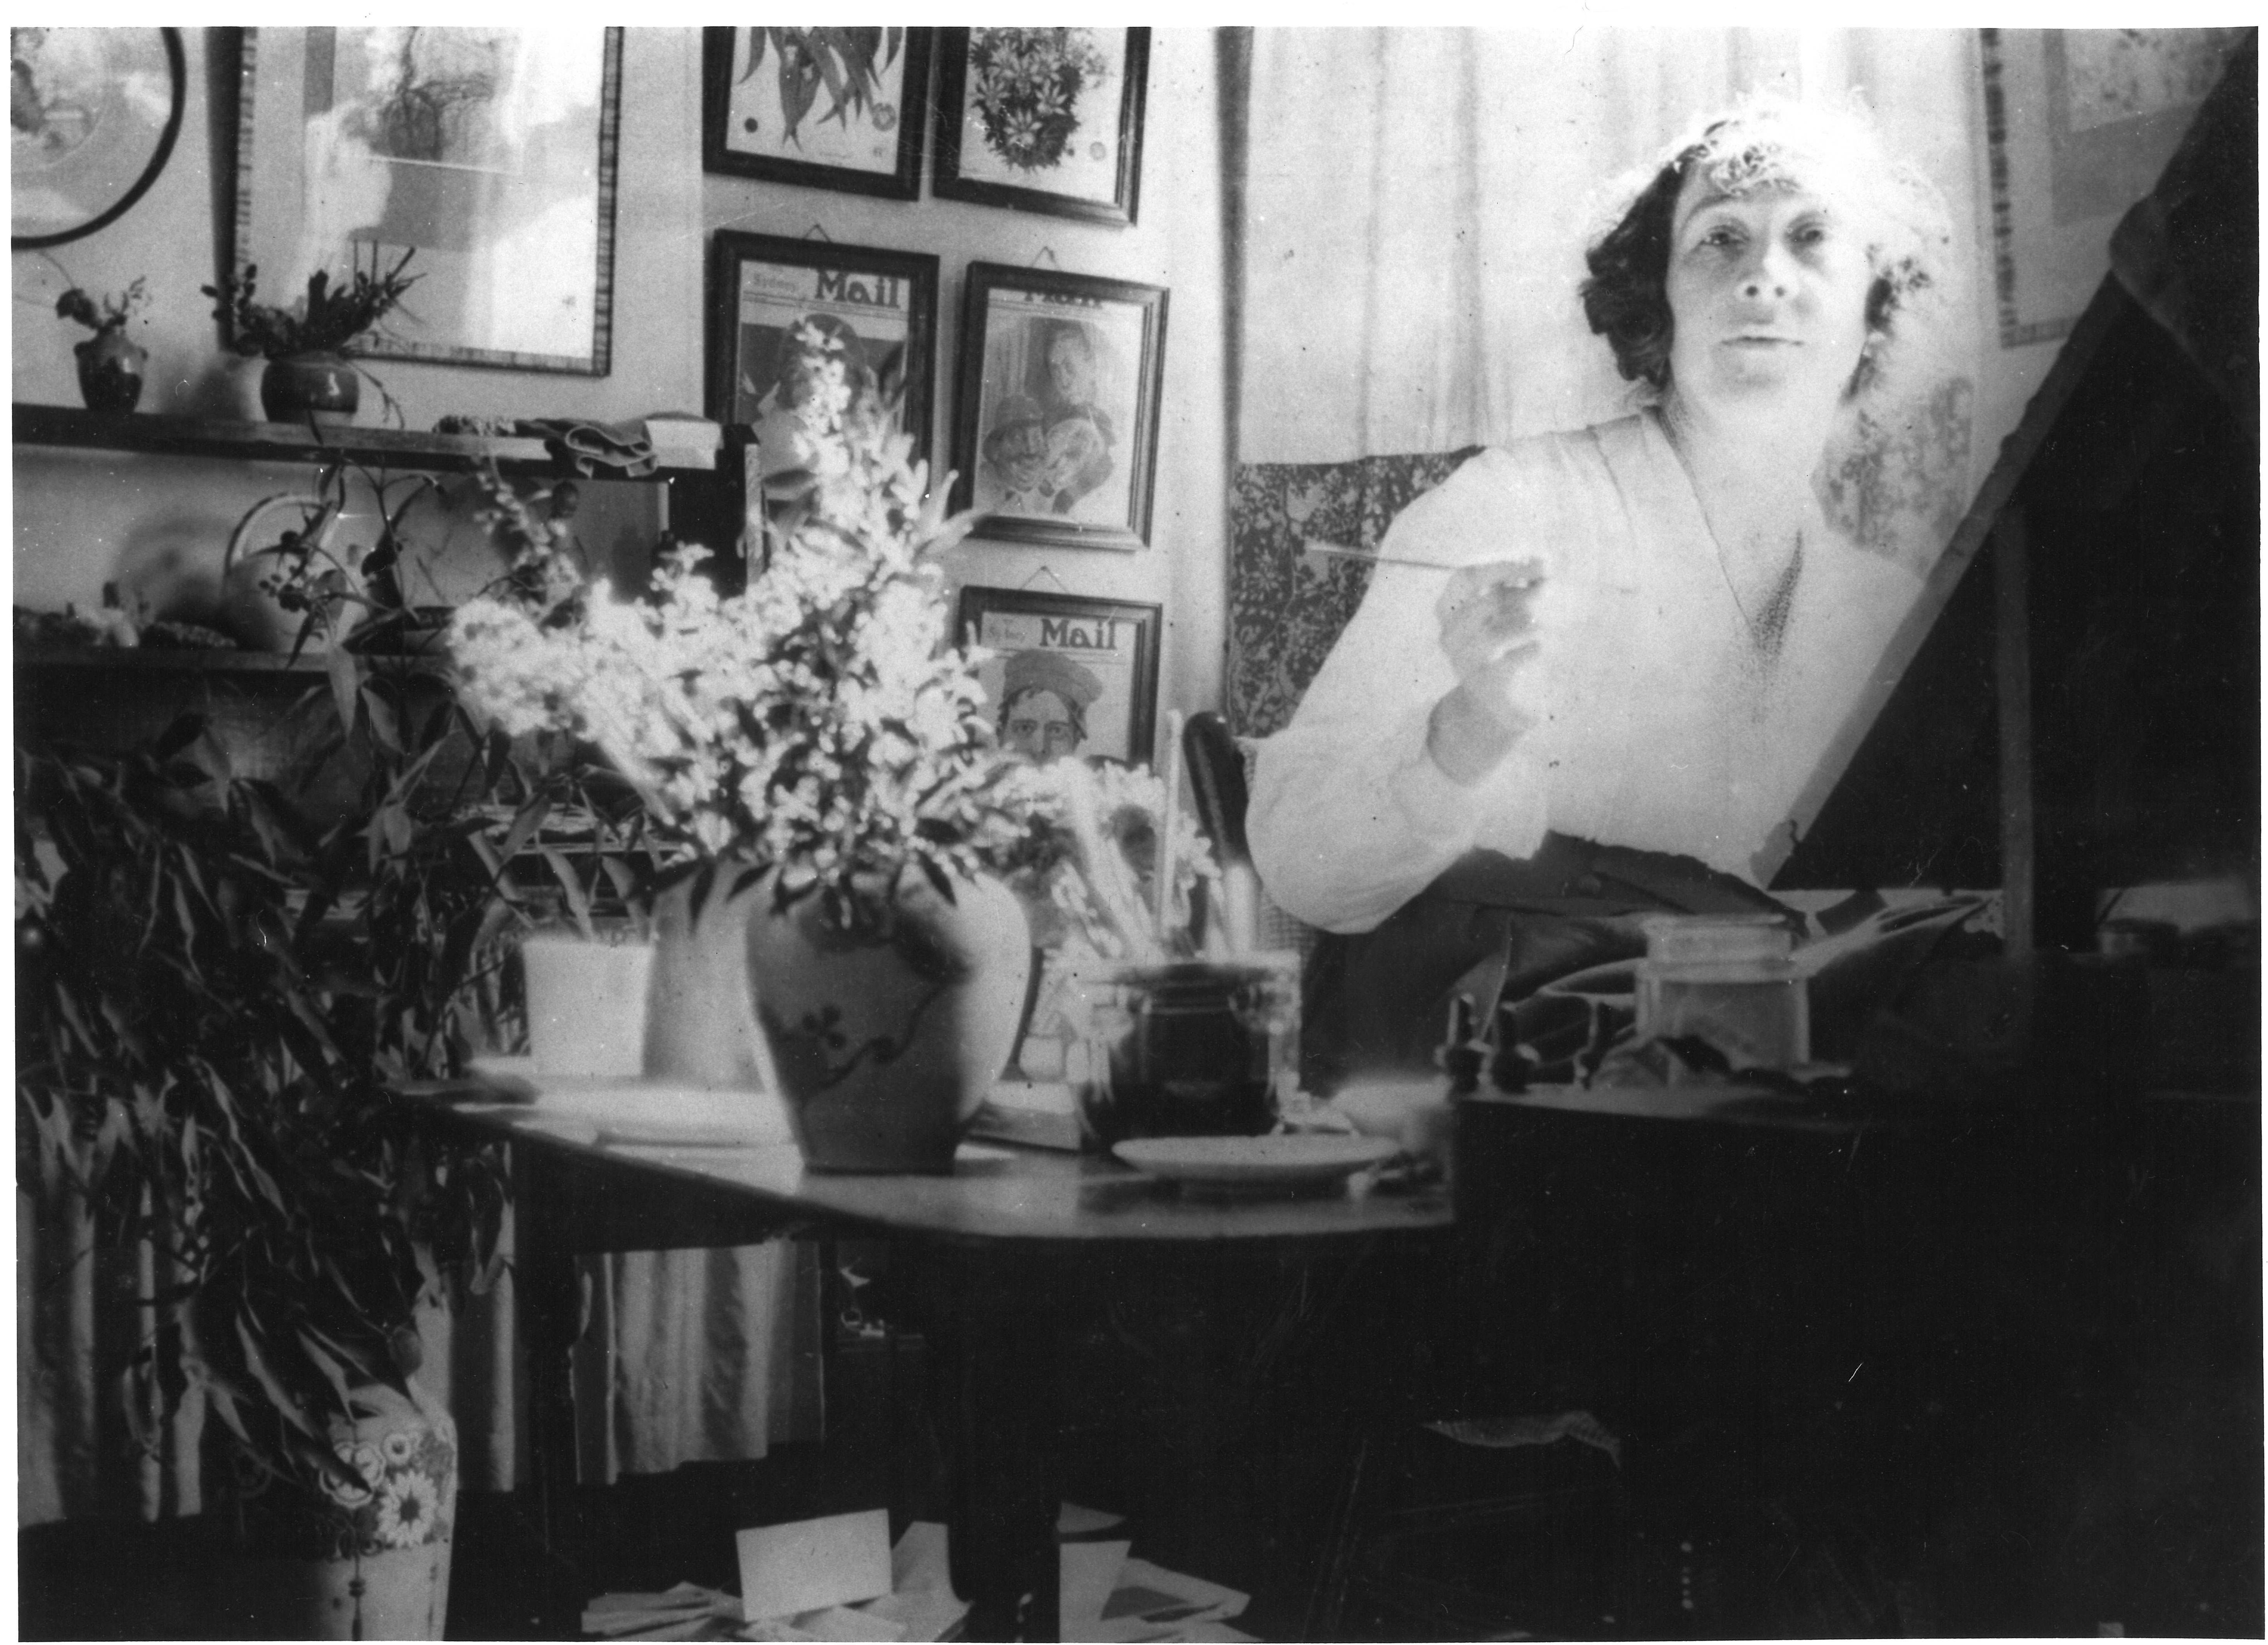 Image 1 of 2 - Photograph of May Gibbs working at her rented studio on Bridge St in Sydney. May is seated behind an easel, looking to camera holding a paintbrush. On a table next to her is a vase of native foliage and a series of her artworks for the Daily Mail are framed on the wall behind her.